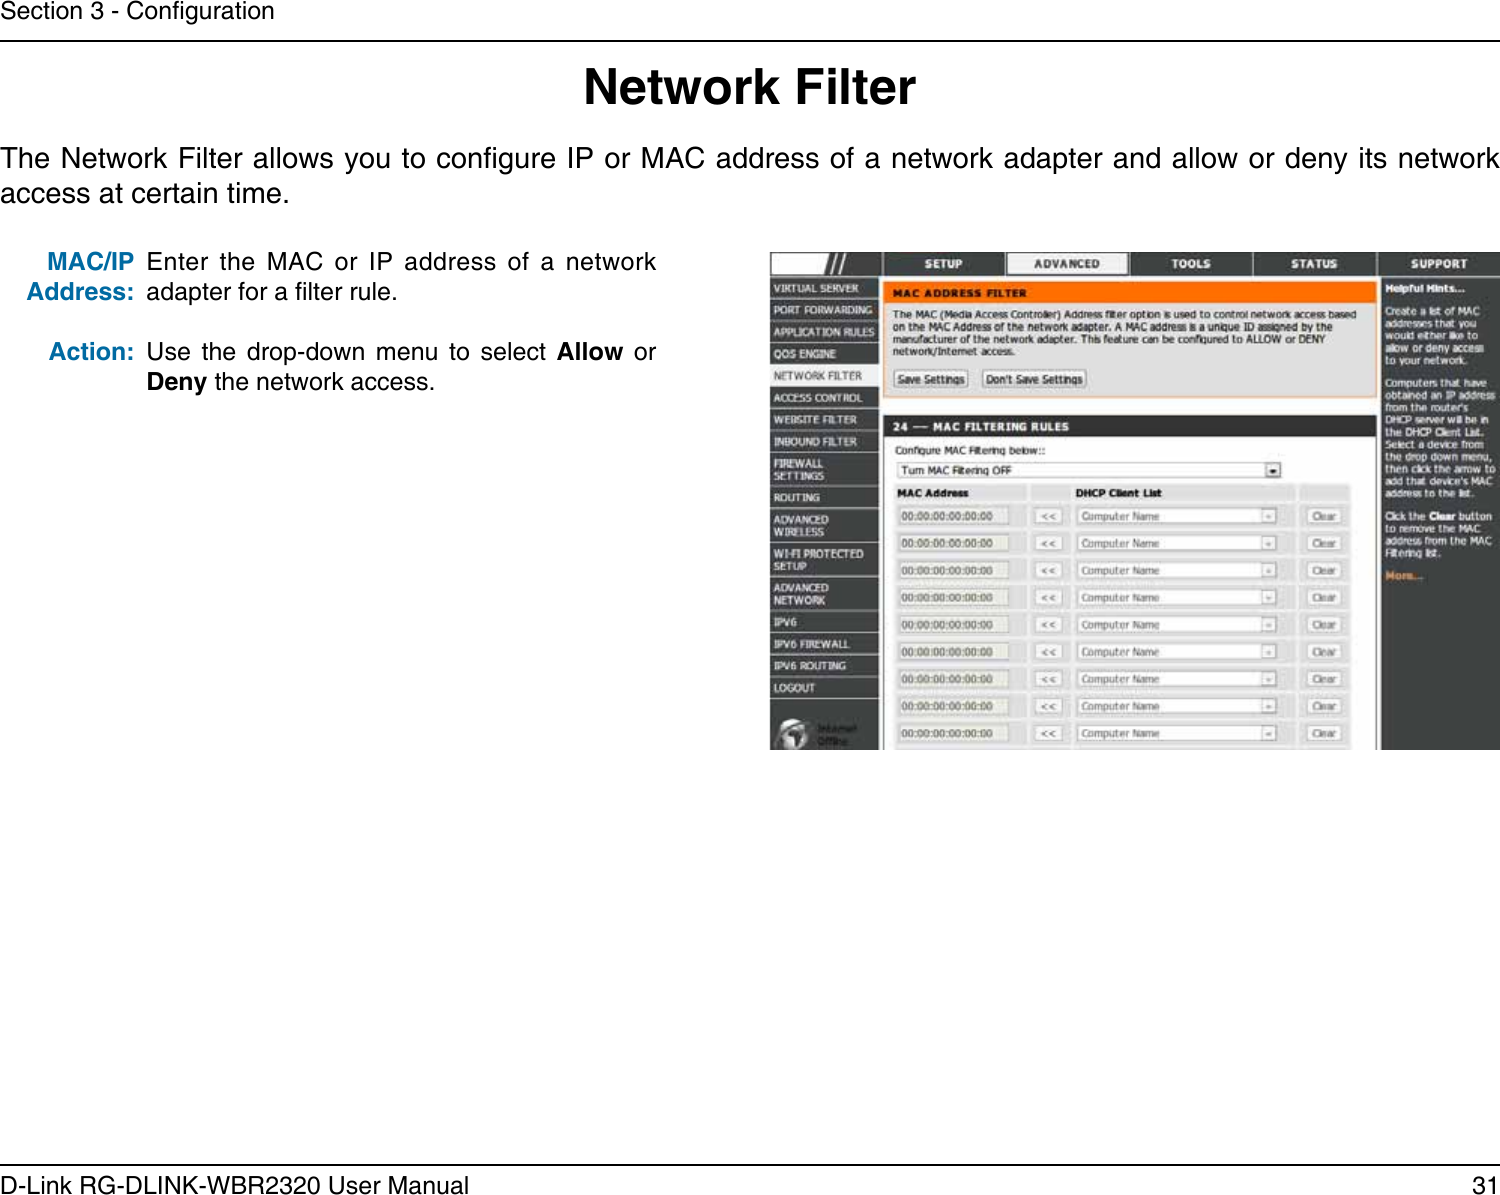 31D-Link RG-DLINK-WBR2320 User ManualSection 3 - CongurationEnter  the  MAC  or  IP  address  of  a  network adapter for a lter rule.Use  the  drop-down  menu  to  select  Allow  or Deny the network access.MAC/IP Address:Action:The Network Filter allows you to congure IP or MAC address of a network adapter and allow or deny its network access at certain time.Network Filter